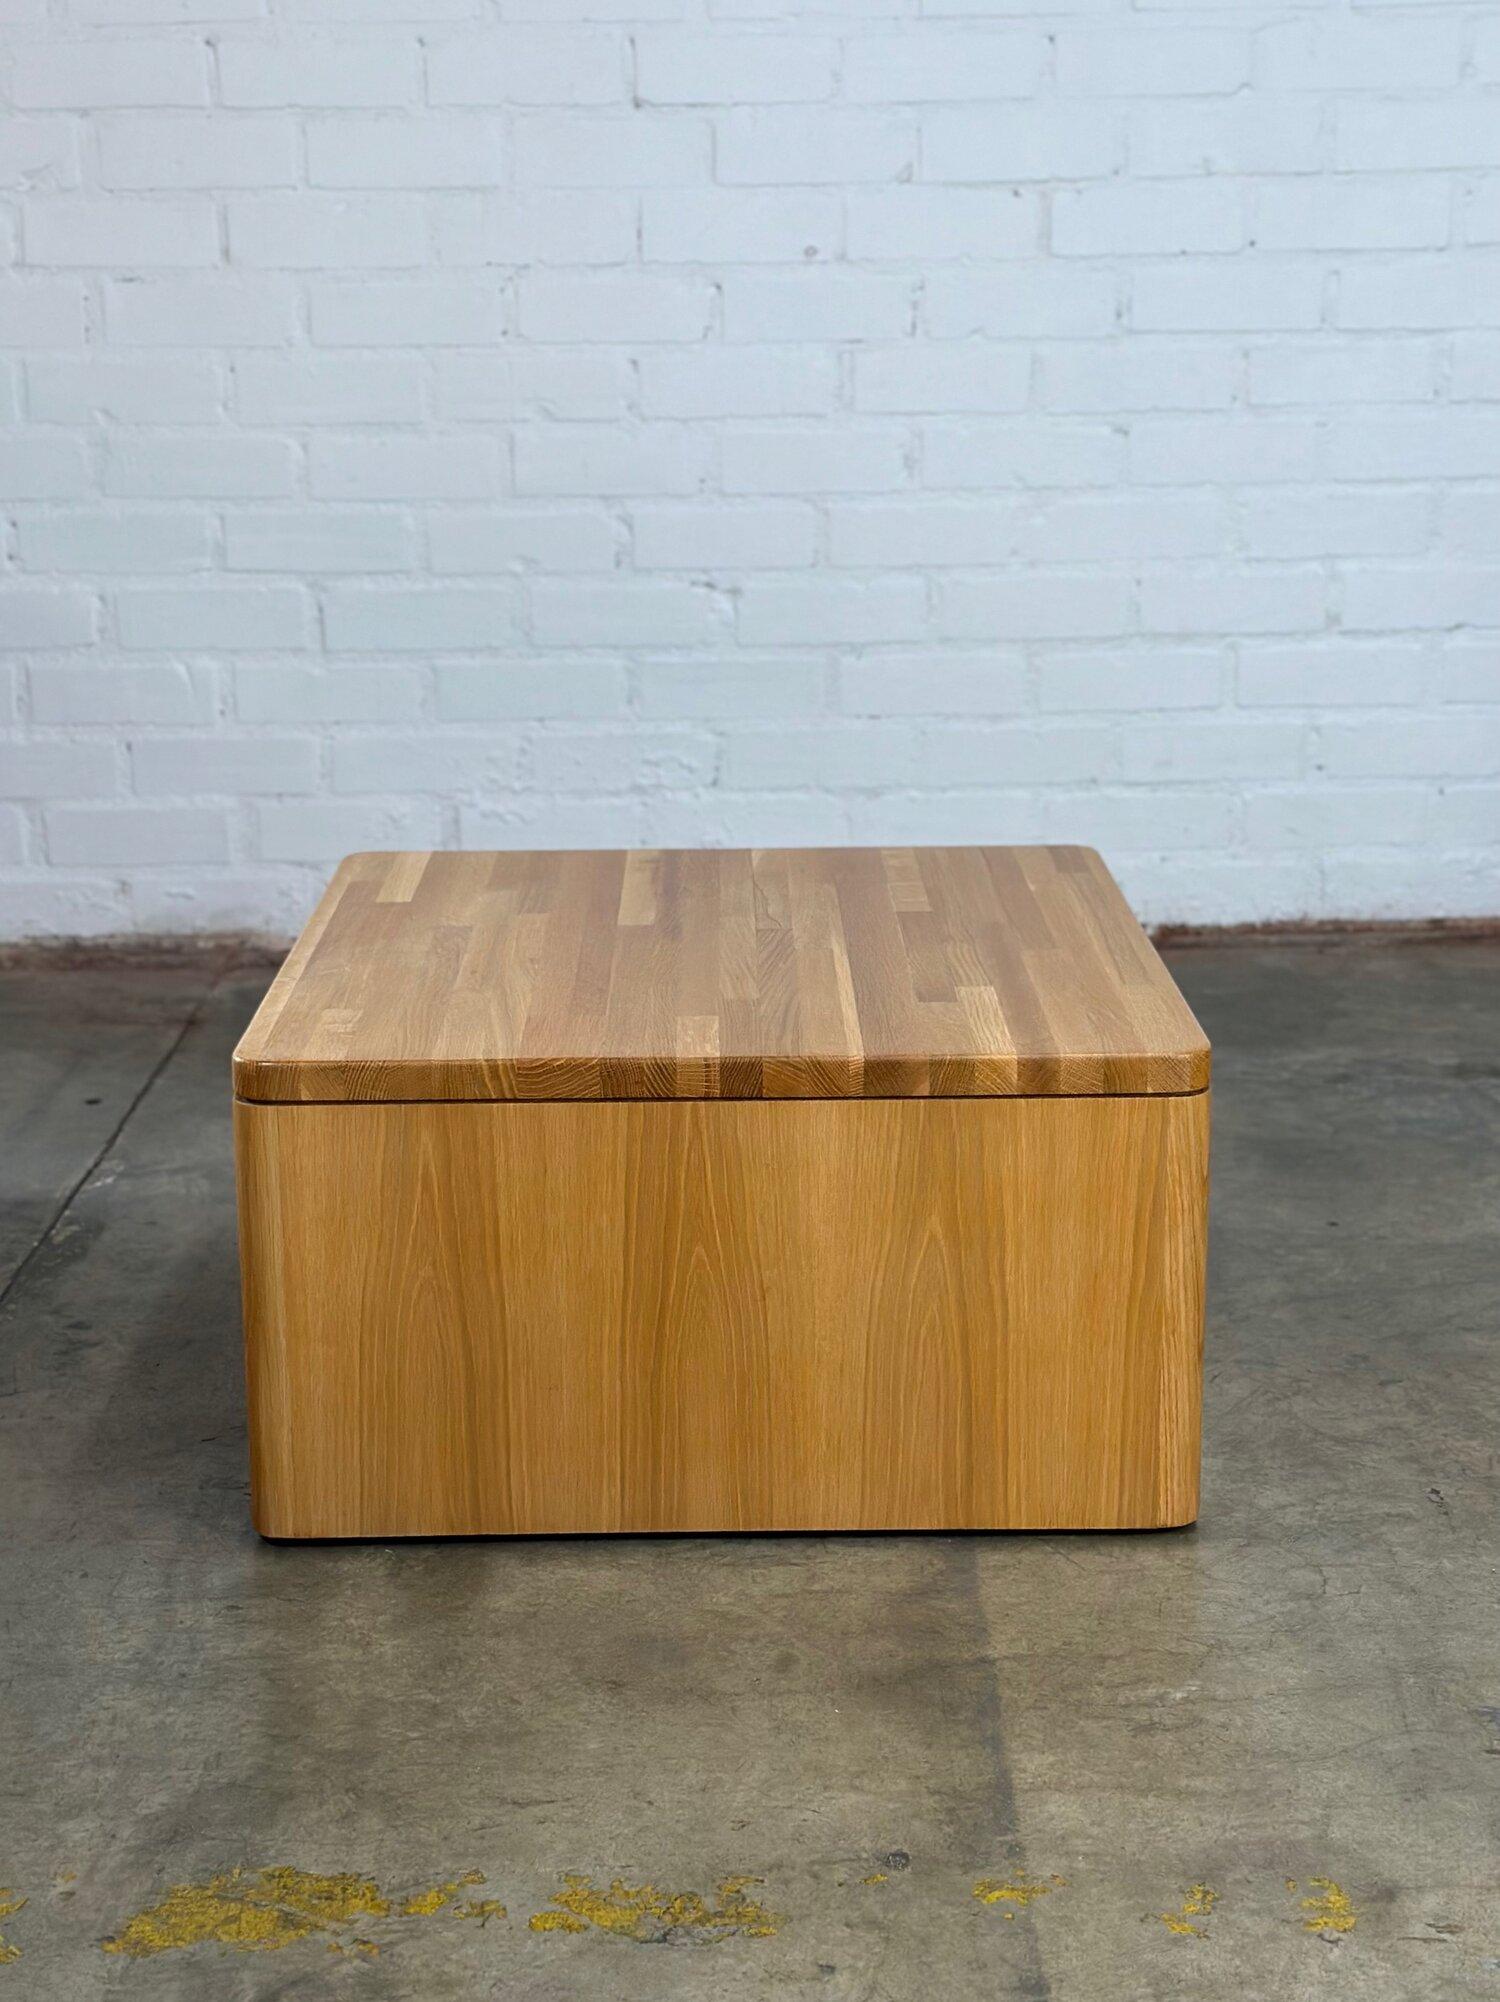 W30 D30 H16

This vintage restored coffee table with a patchwork top and horizontal oak grain along the bottom. The coroners are rounded with a minimal design and a clean finish through out.